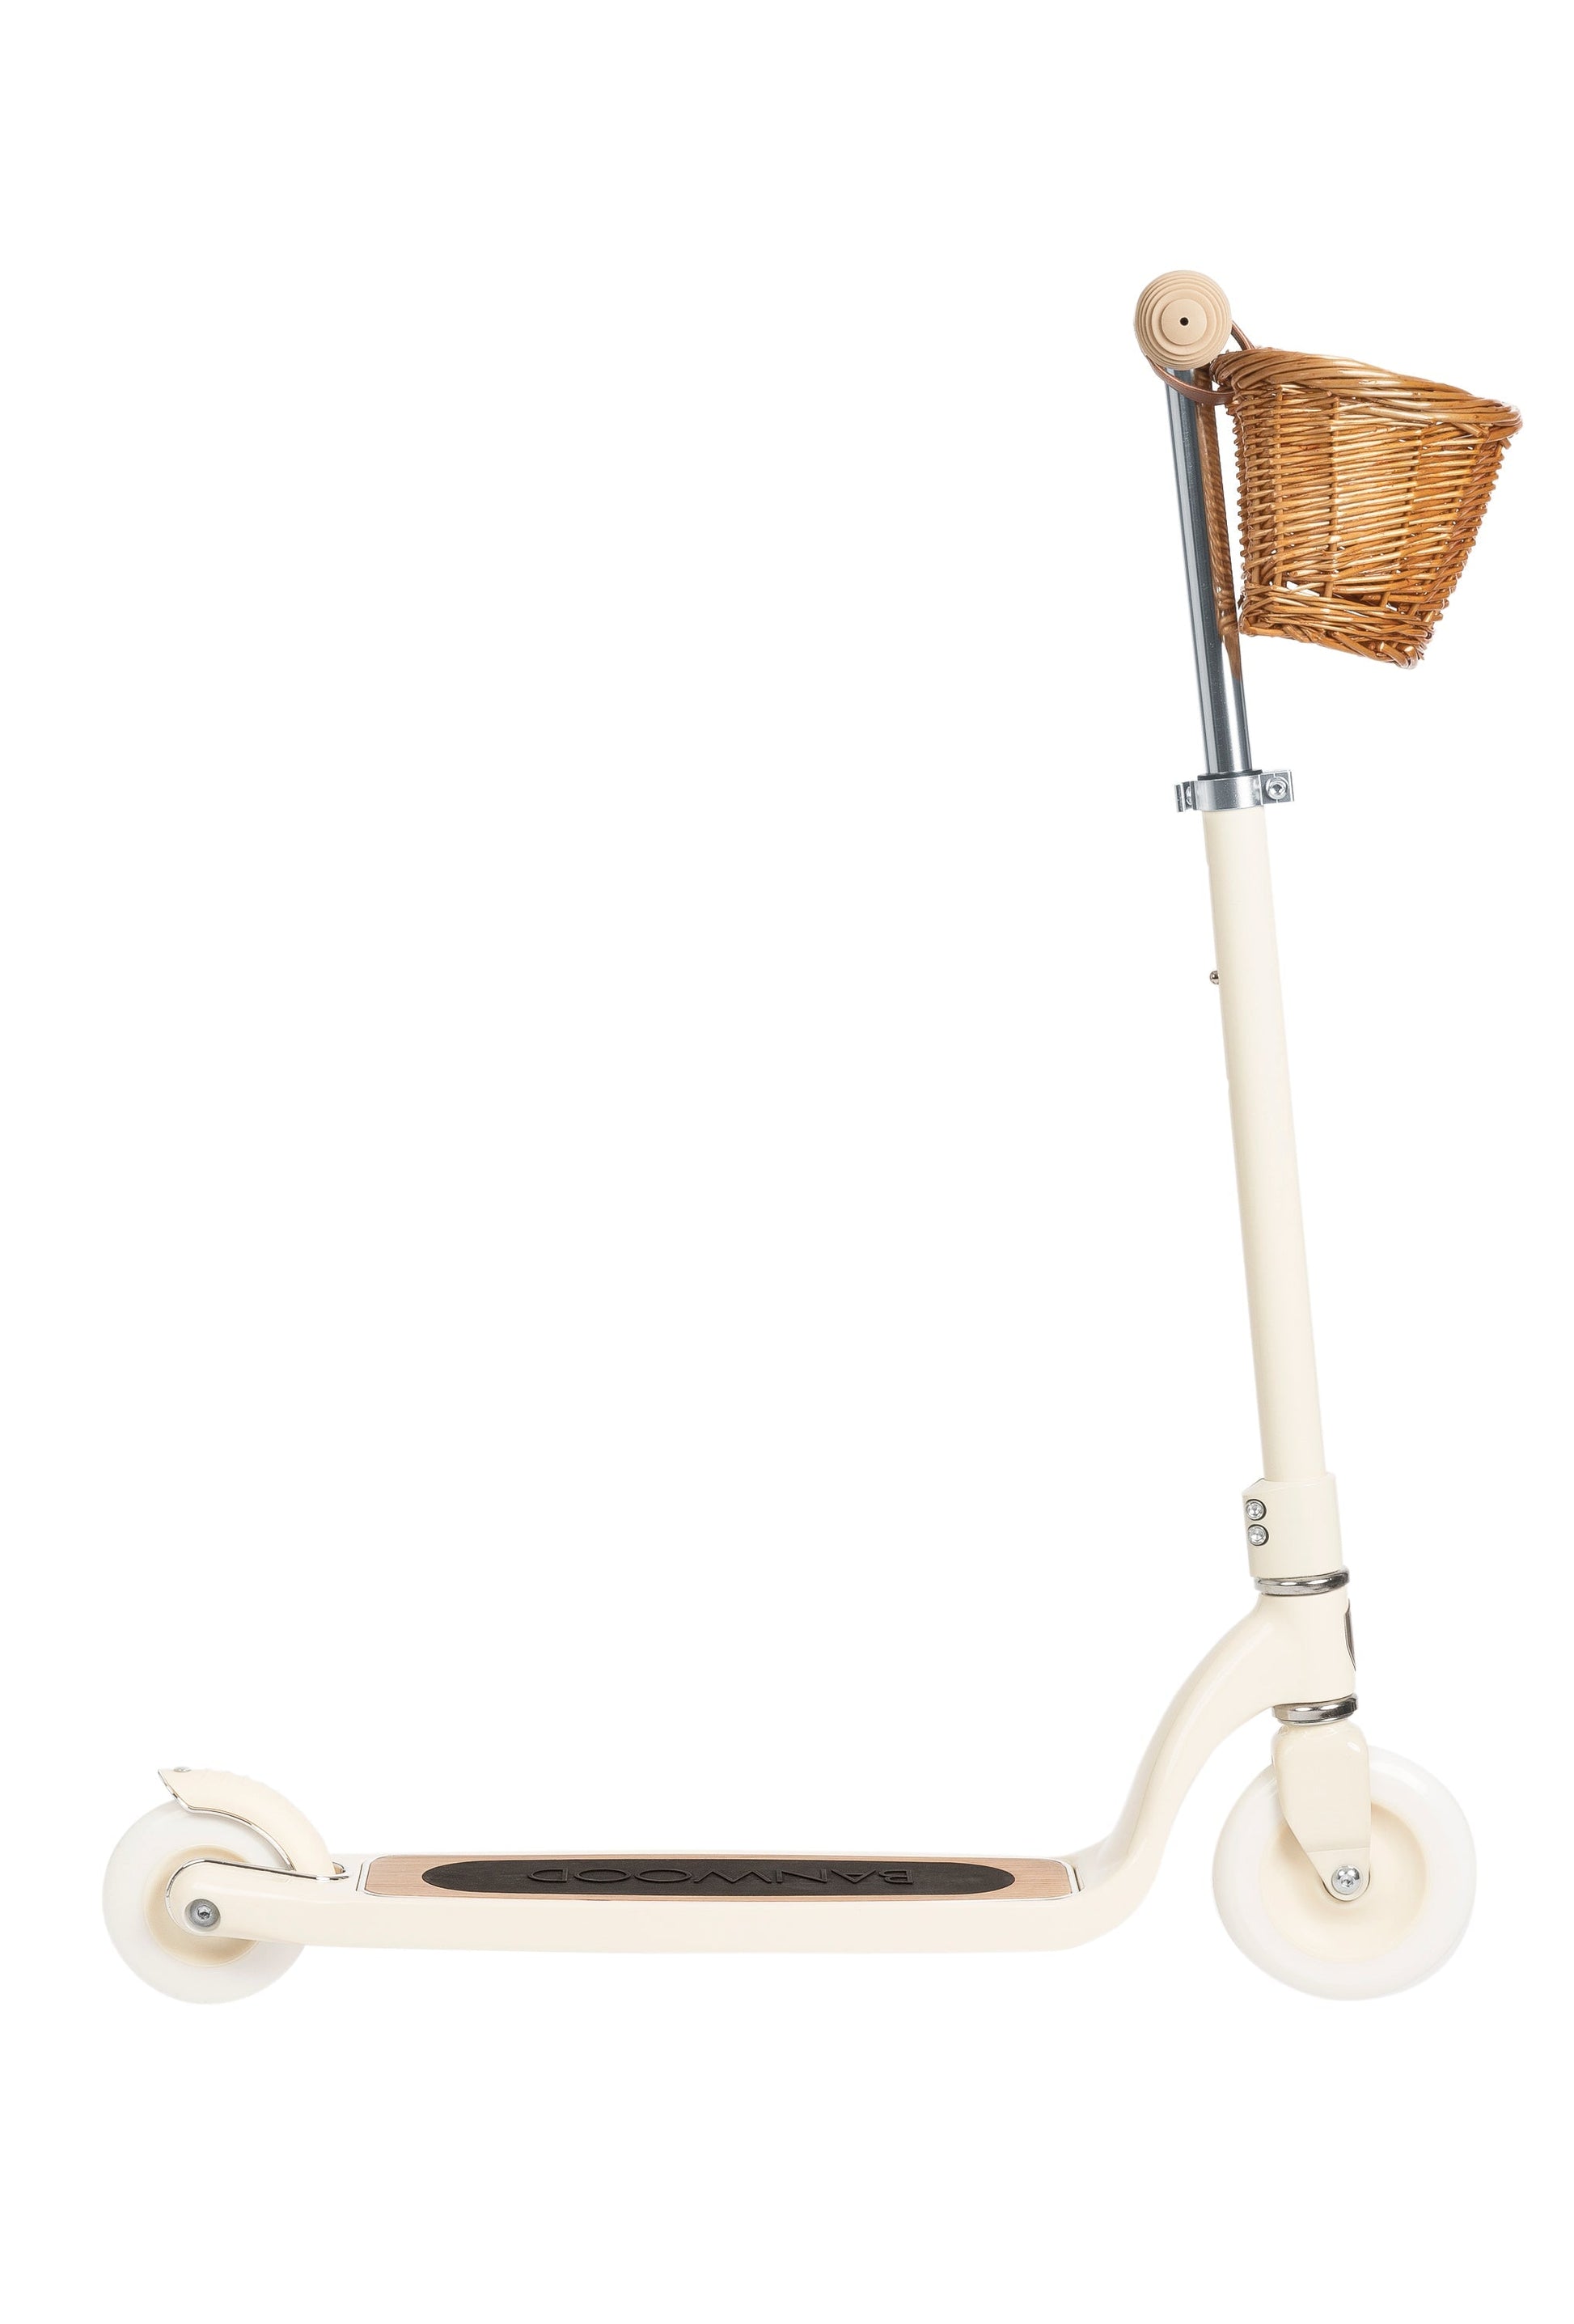 Maxi Scooter by BANWOOD, Multiple Colors Riding Toys - Alder & Alouette